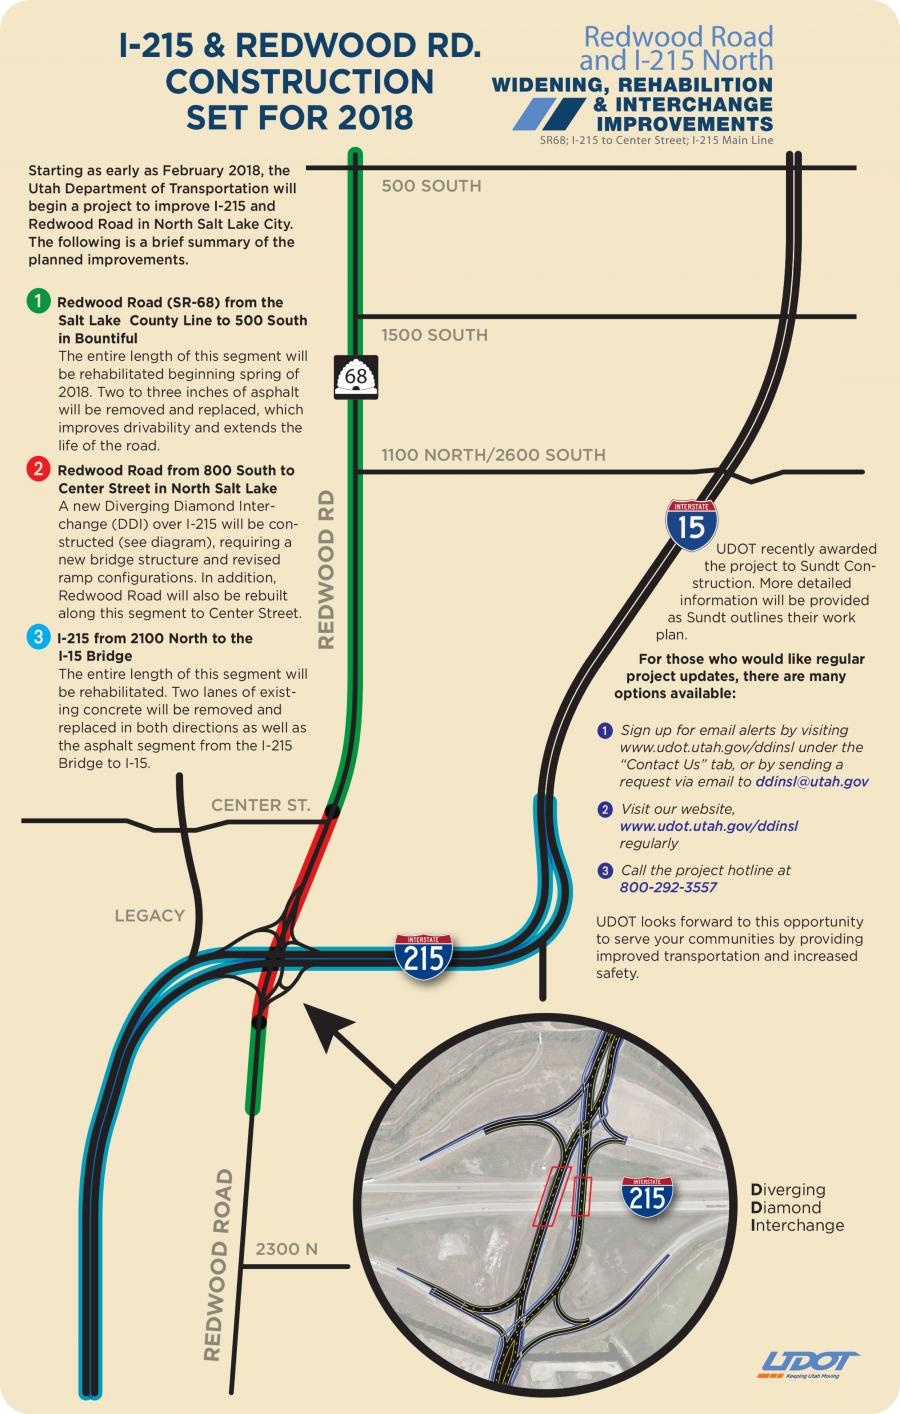 UDOT will begin a major project to improve operations at I-215 and Redwood Road in North Salt Lake City by building a Diverging Diamond Interchange (DDI). 
(UDOT photo)